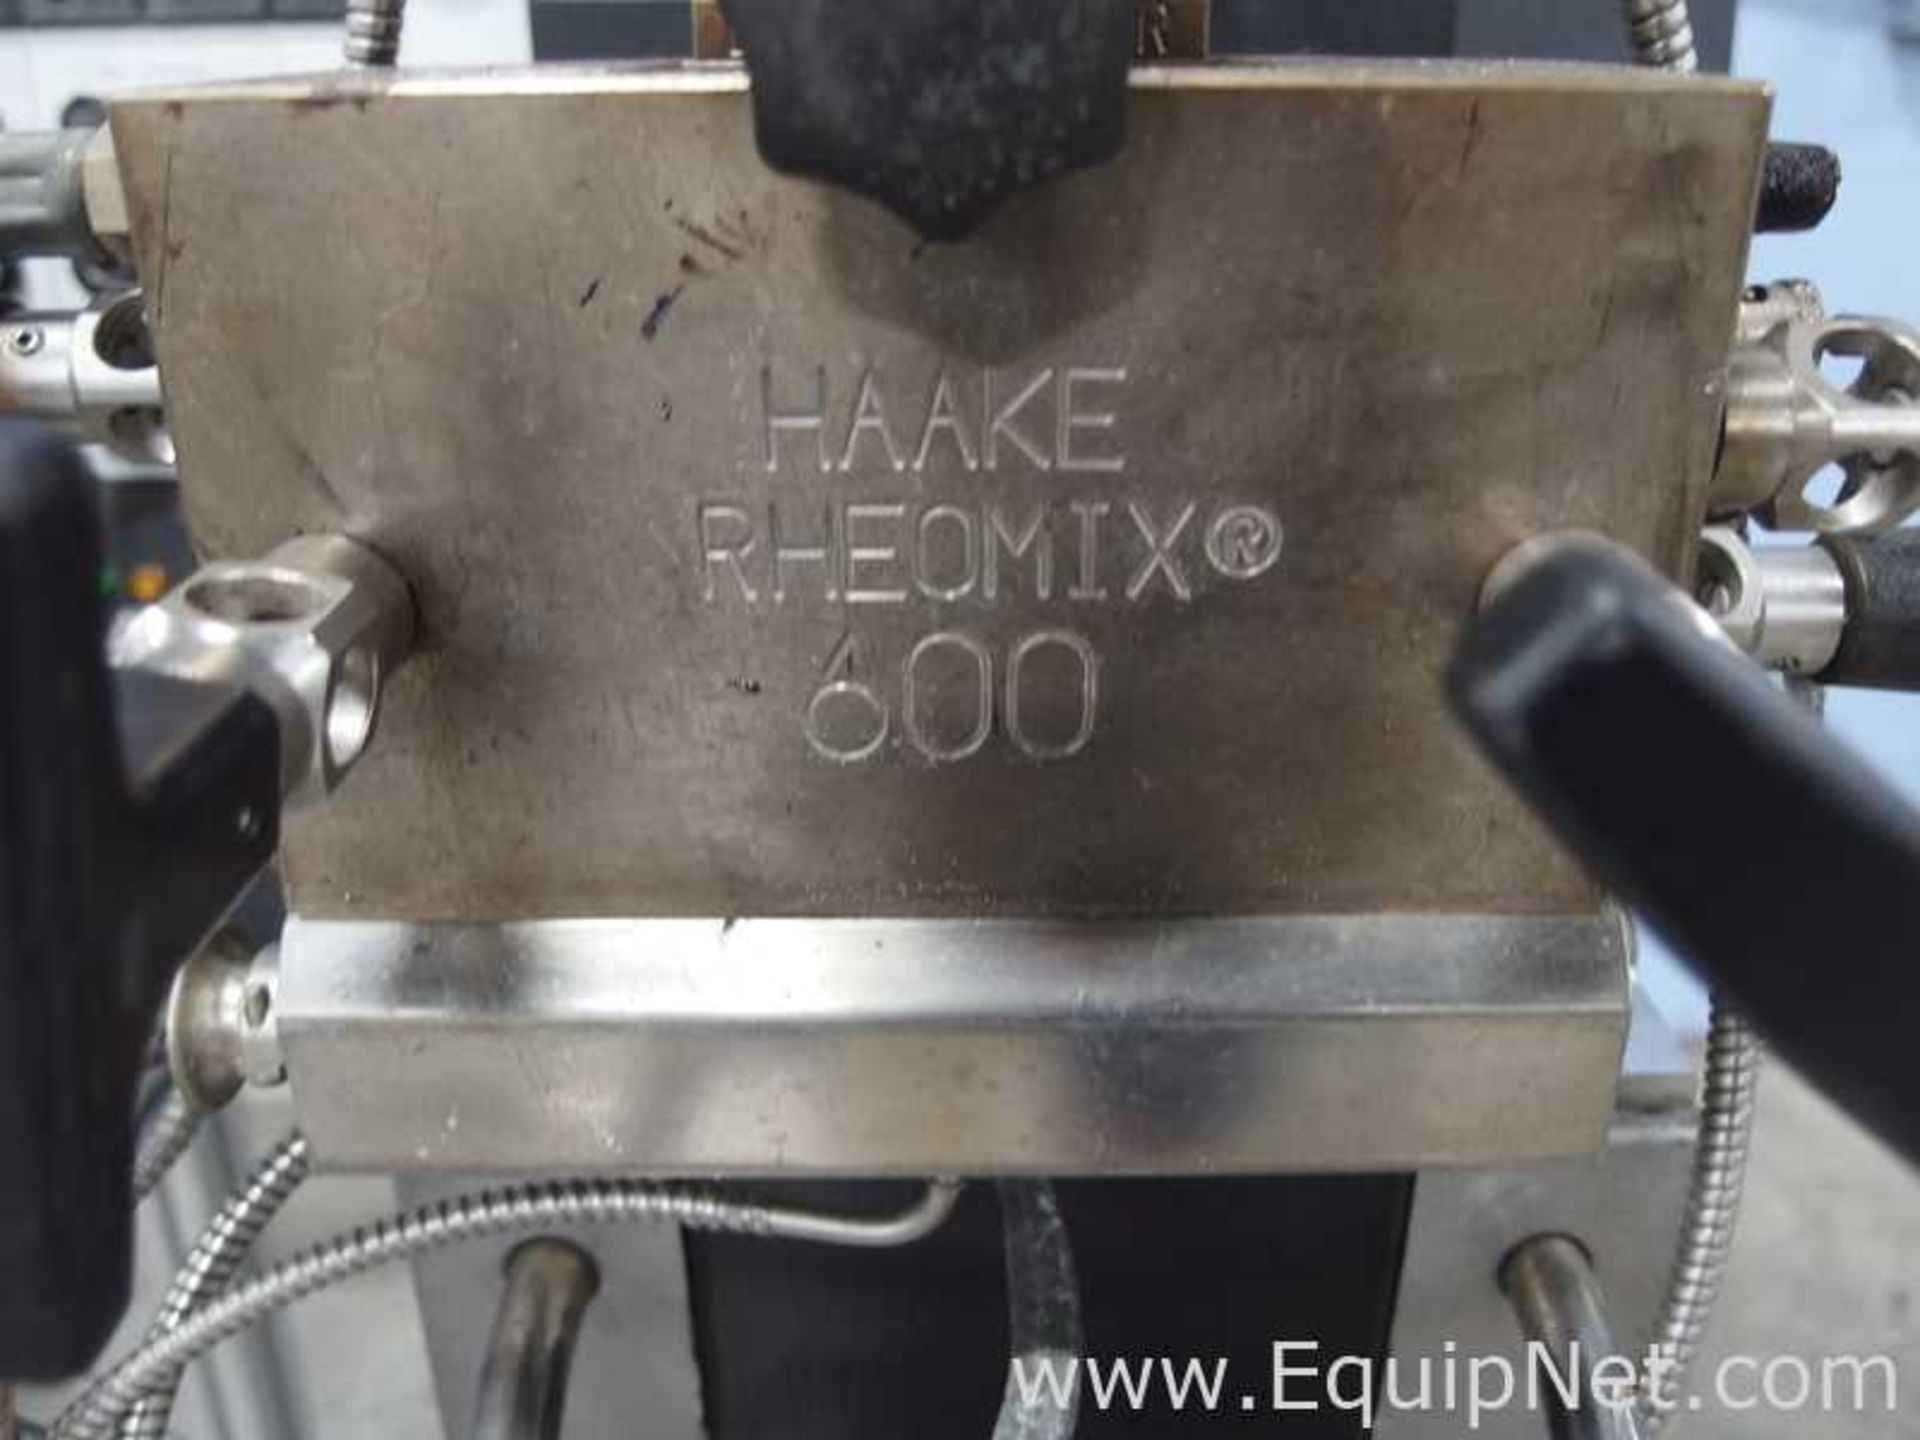 Haake Type 001-9758/194015677002 Lab System With Rheomix 600 Mixer - Image 3 of 18